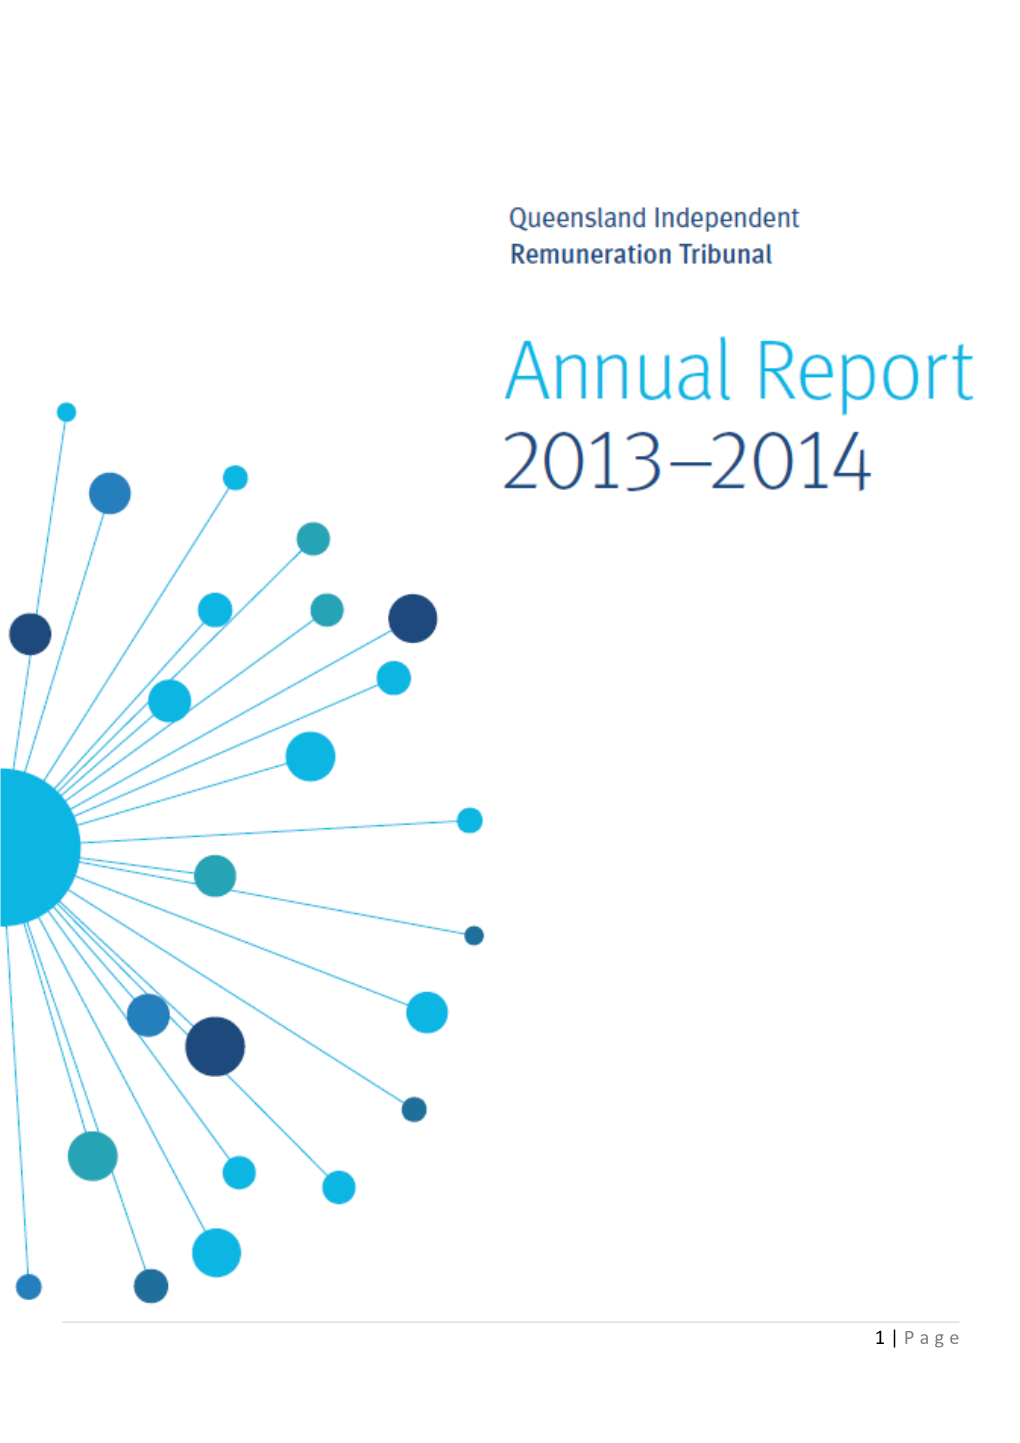 The Annual Report Can Be Accessed Online At